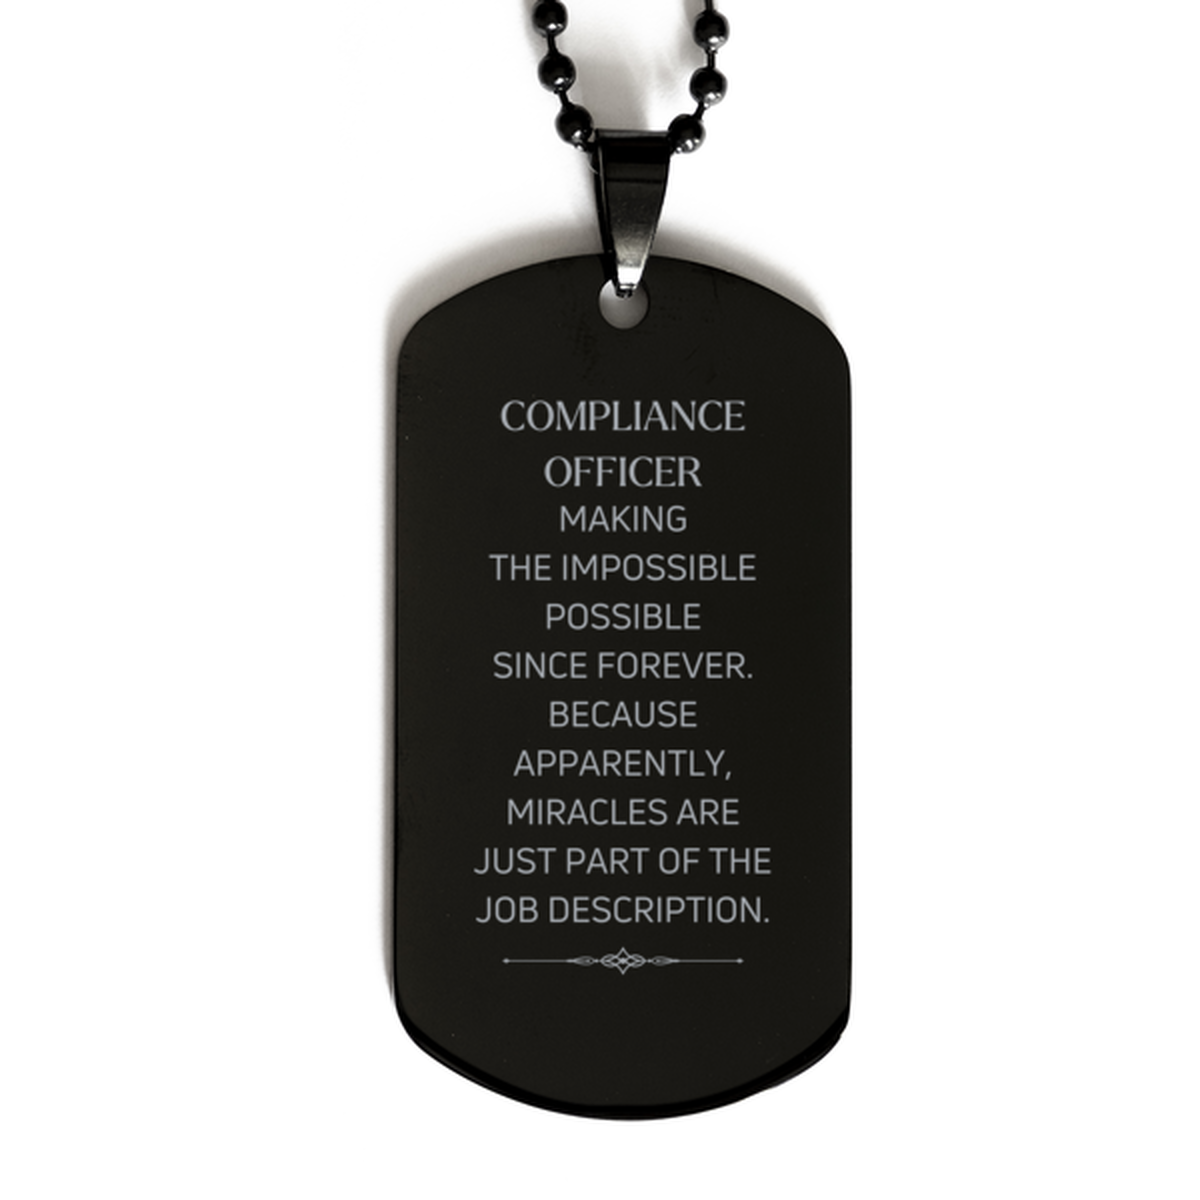 Funny Compliance Officer Gifts, Miracles are just part of the job description, Inspirational Birthday Black Dog Tag For Compliance Officer, Men, Women, Coworkers, Friends, Boss